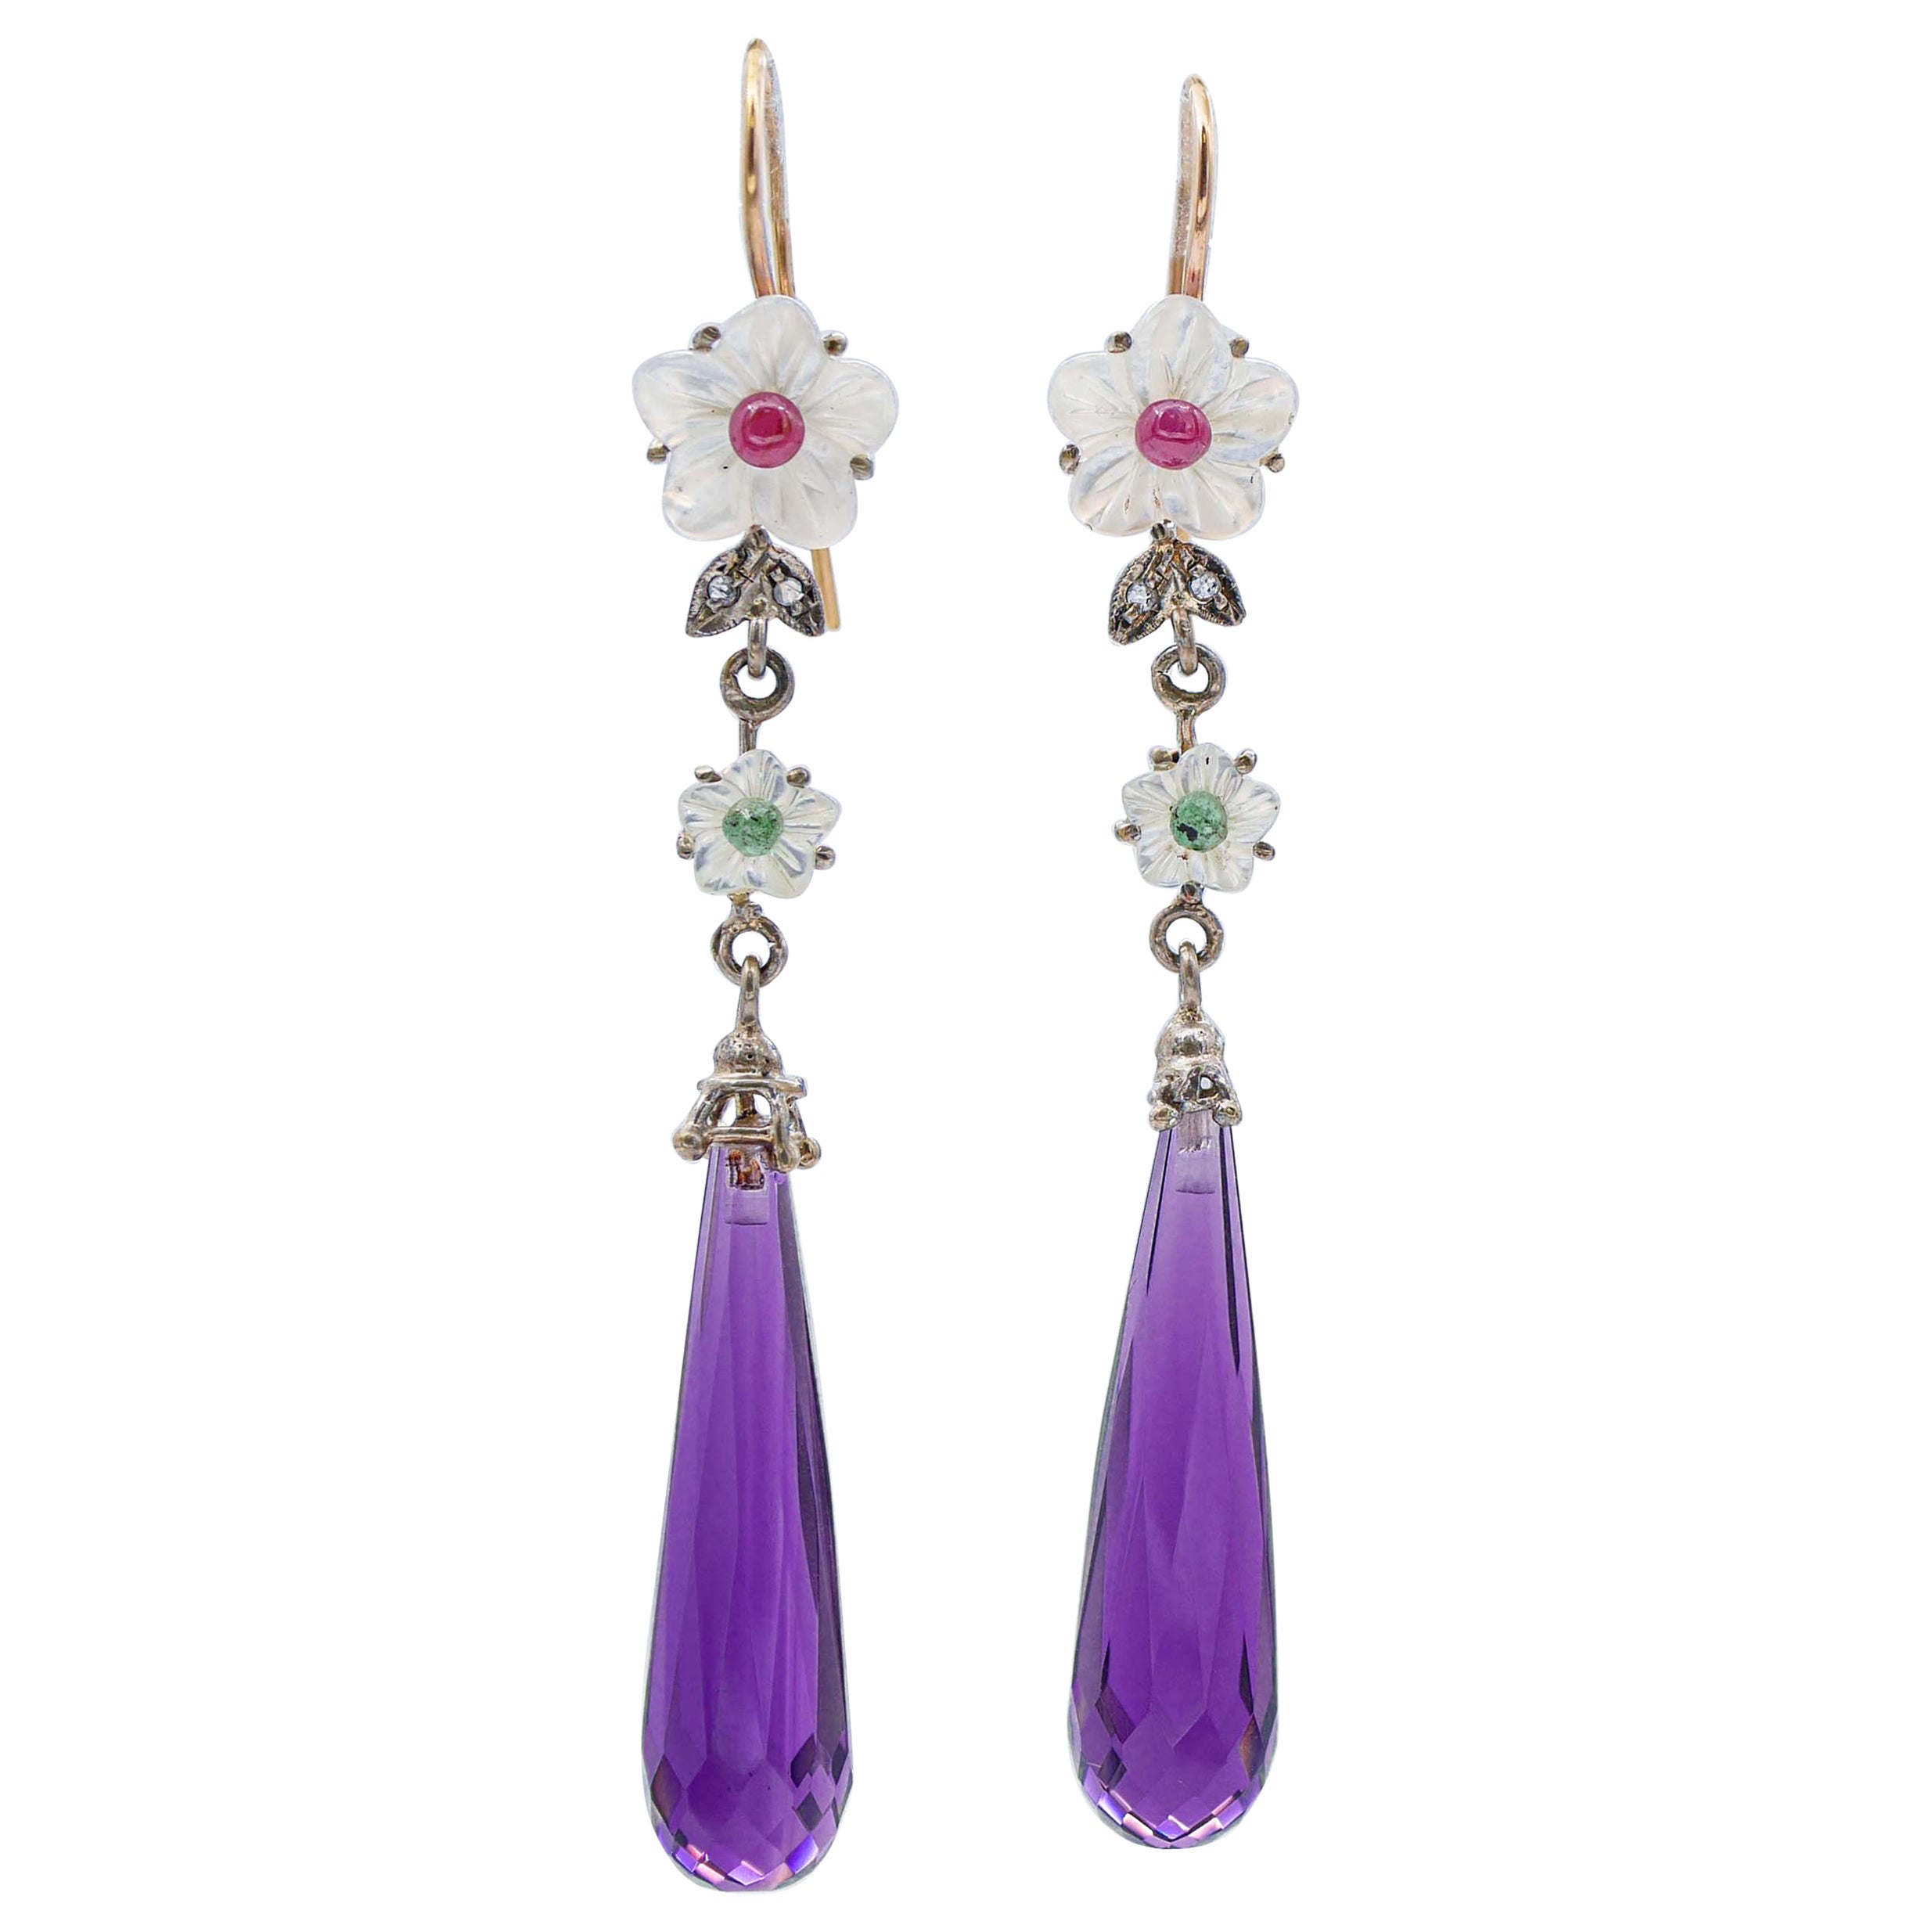 Amethysts, Emeralds, Diamonds, Rubies, White Stones, Gold and Silver Earrings